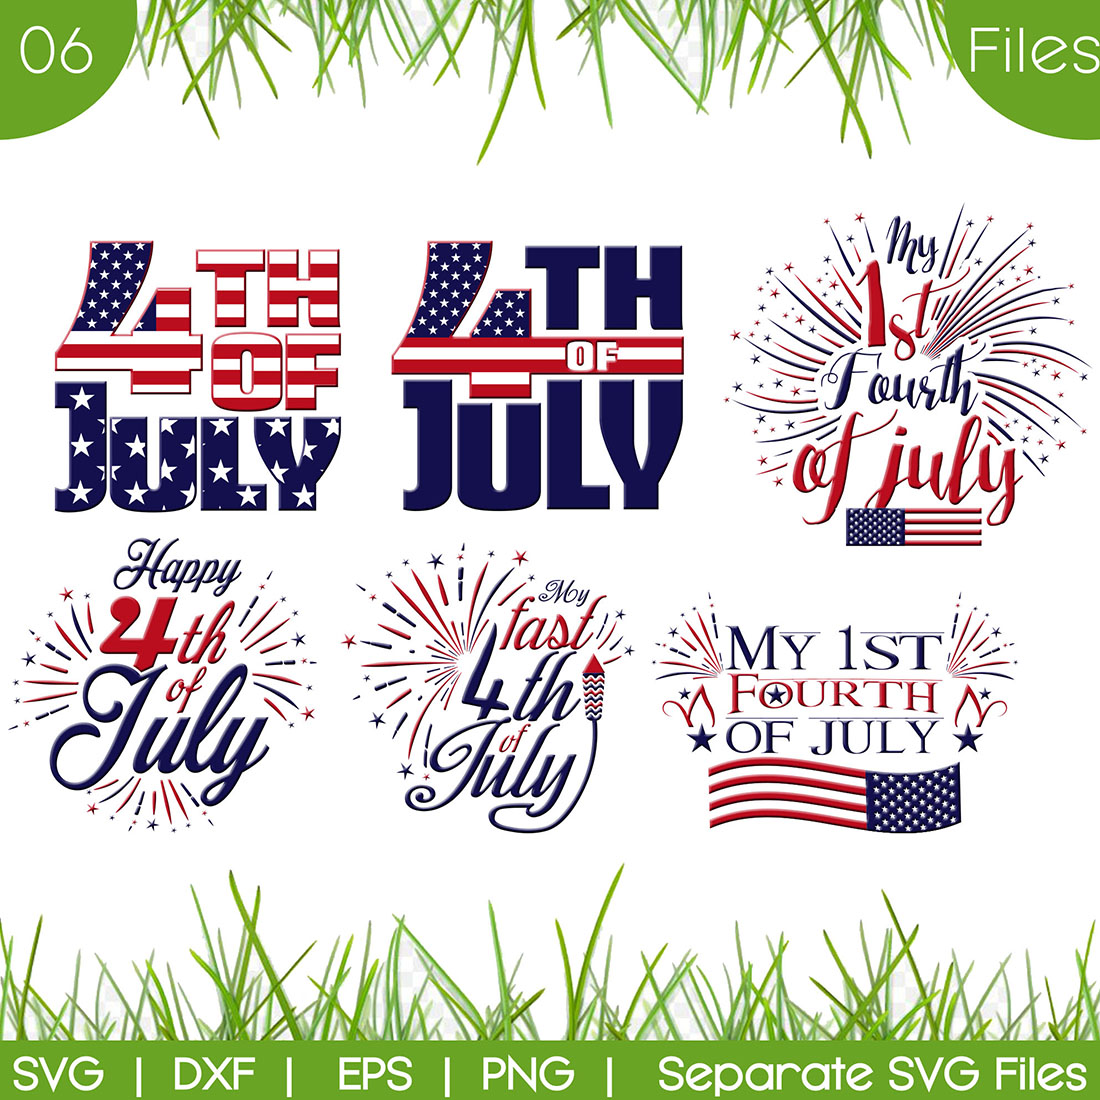 4th of July Firework SVG Collection cover image.